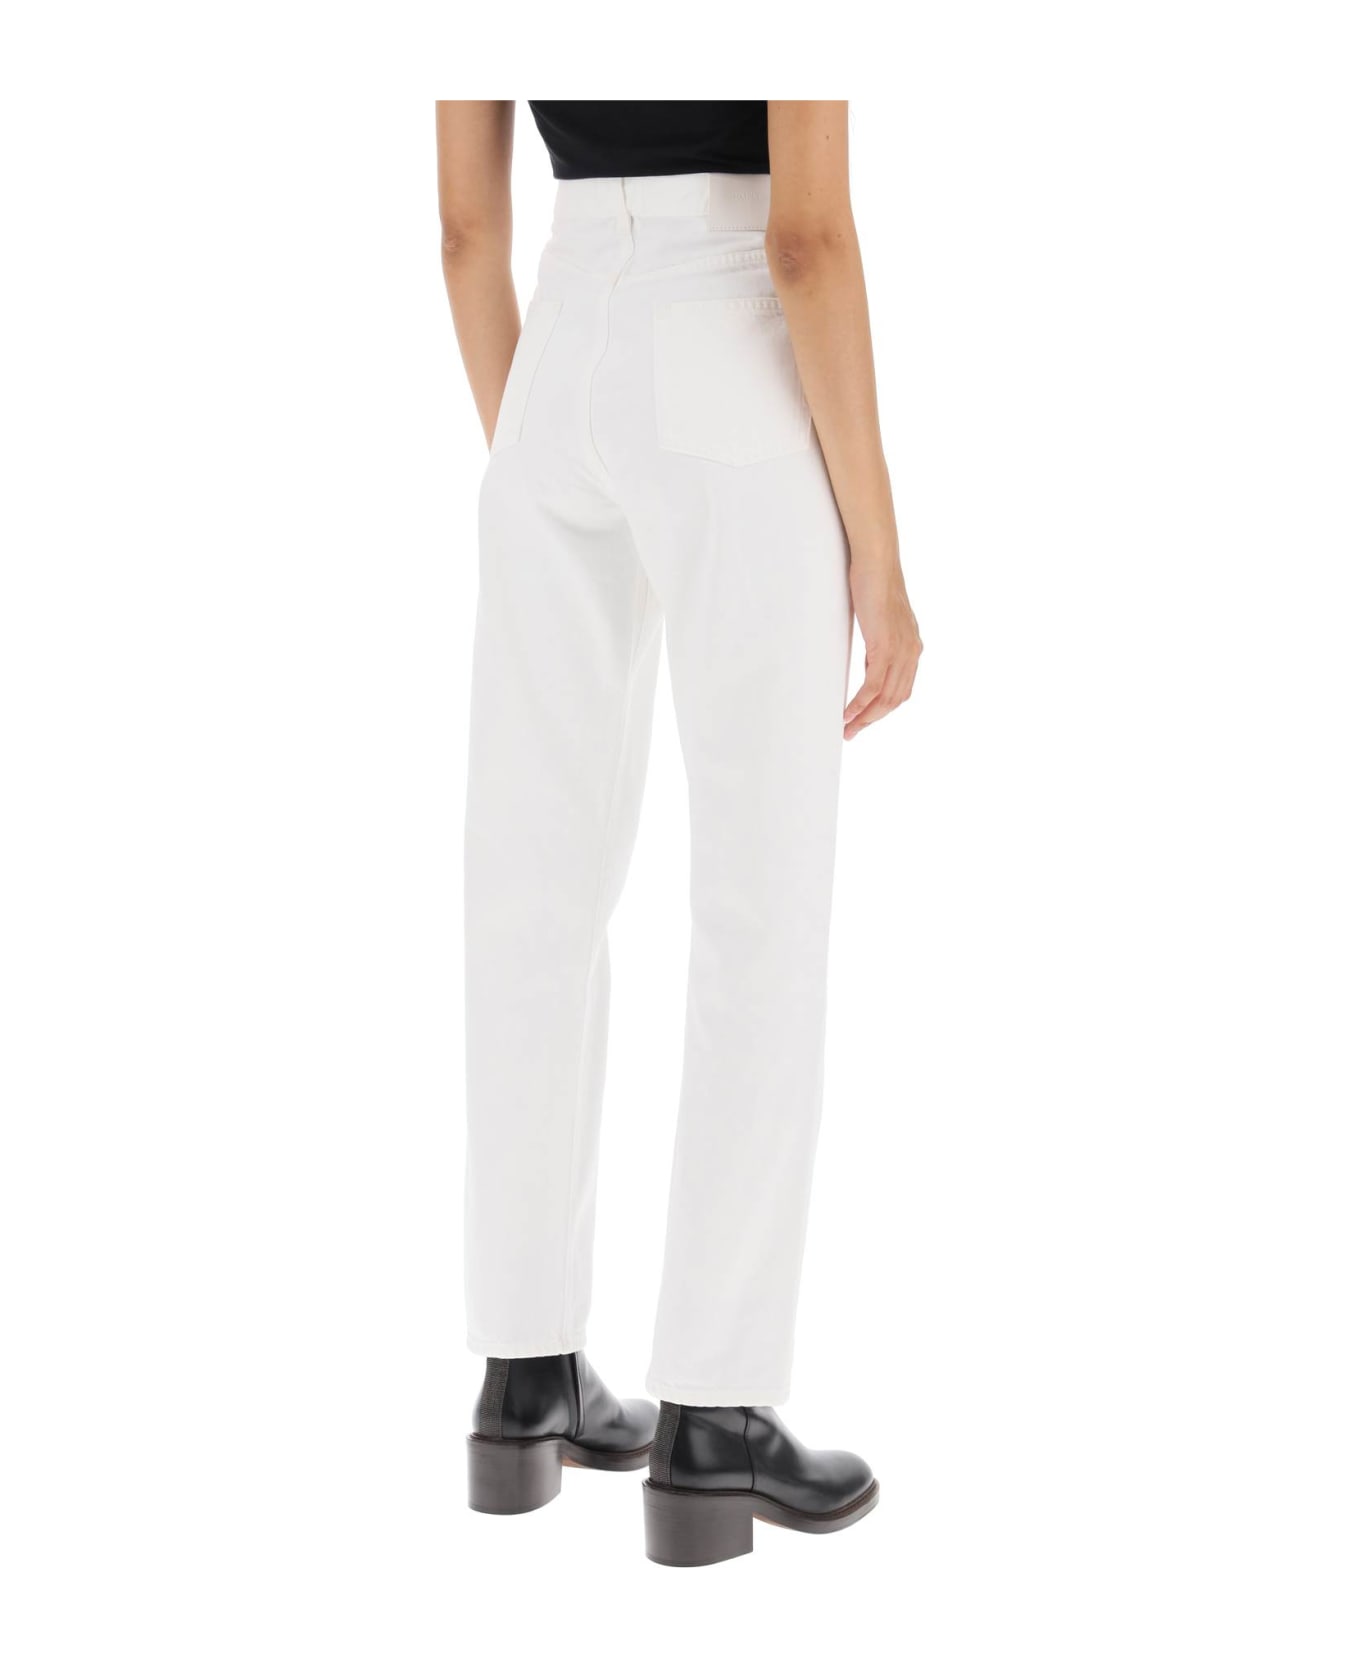 Loulou Studio Cropped Straight Cut Jeans - Ivory